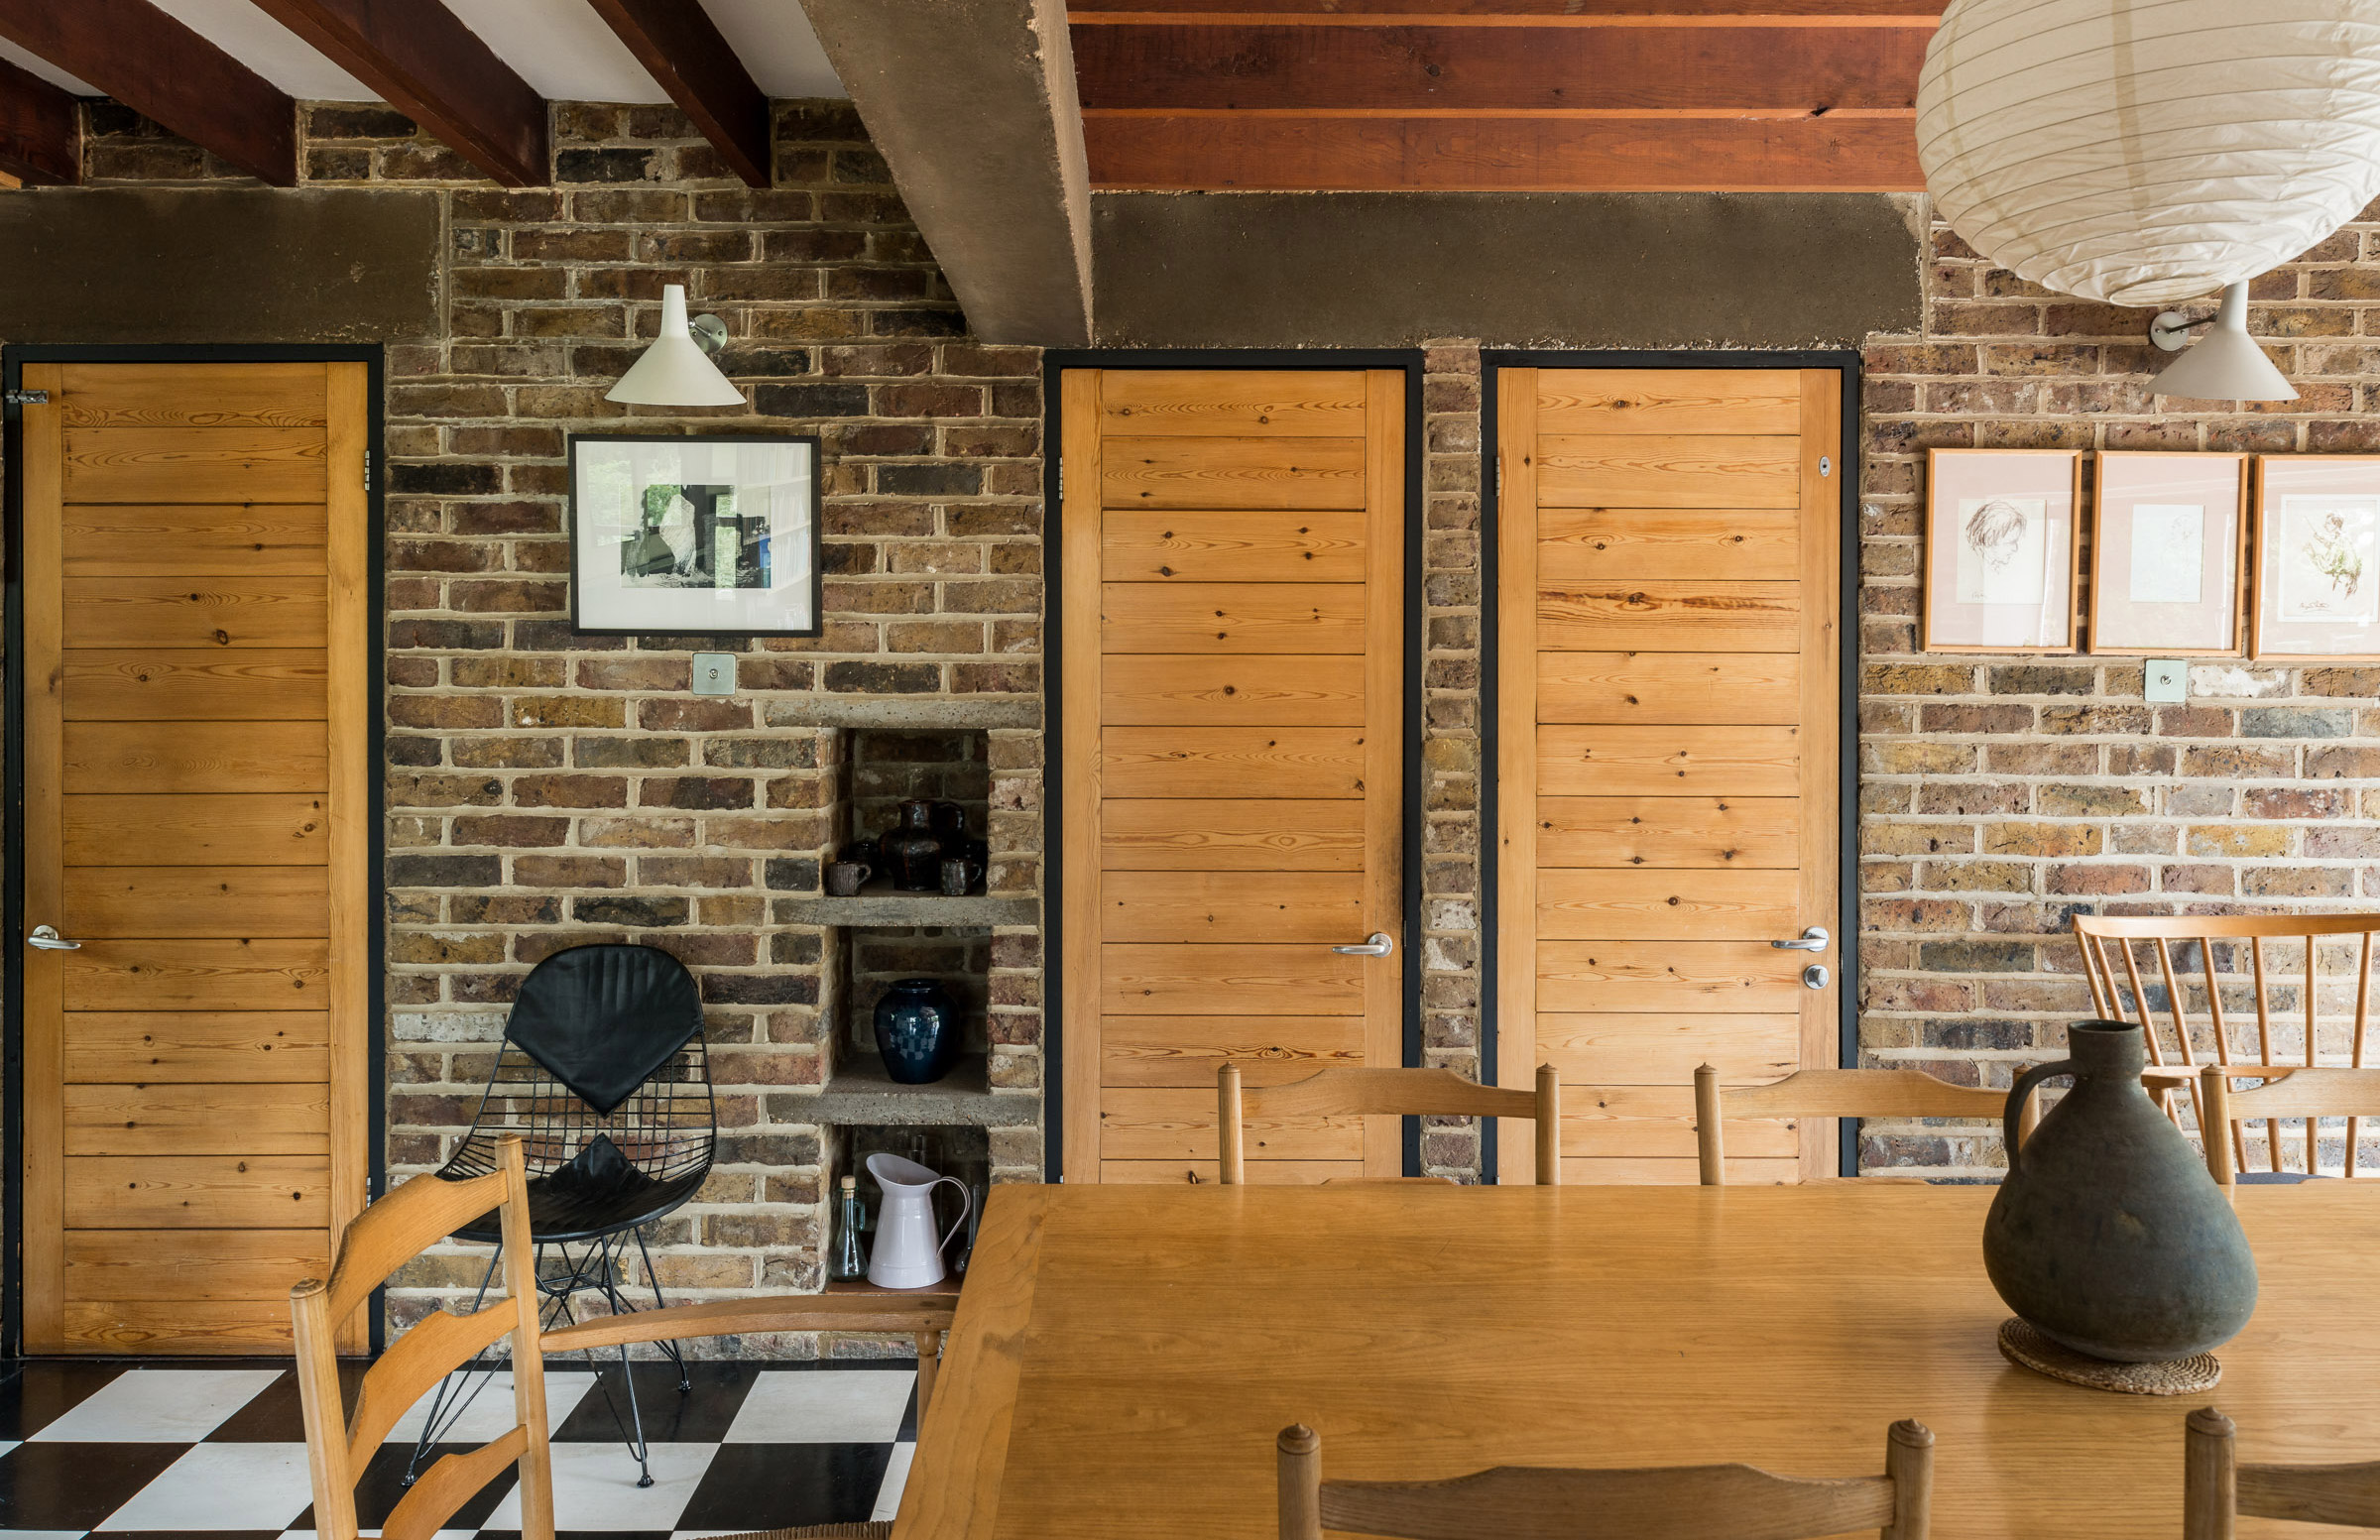 A post-war gem by Alison and Peter Smithson hits the market for the first time ever